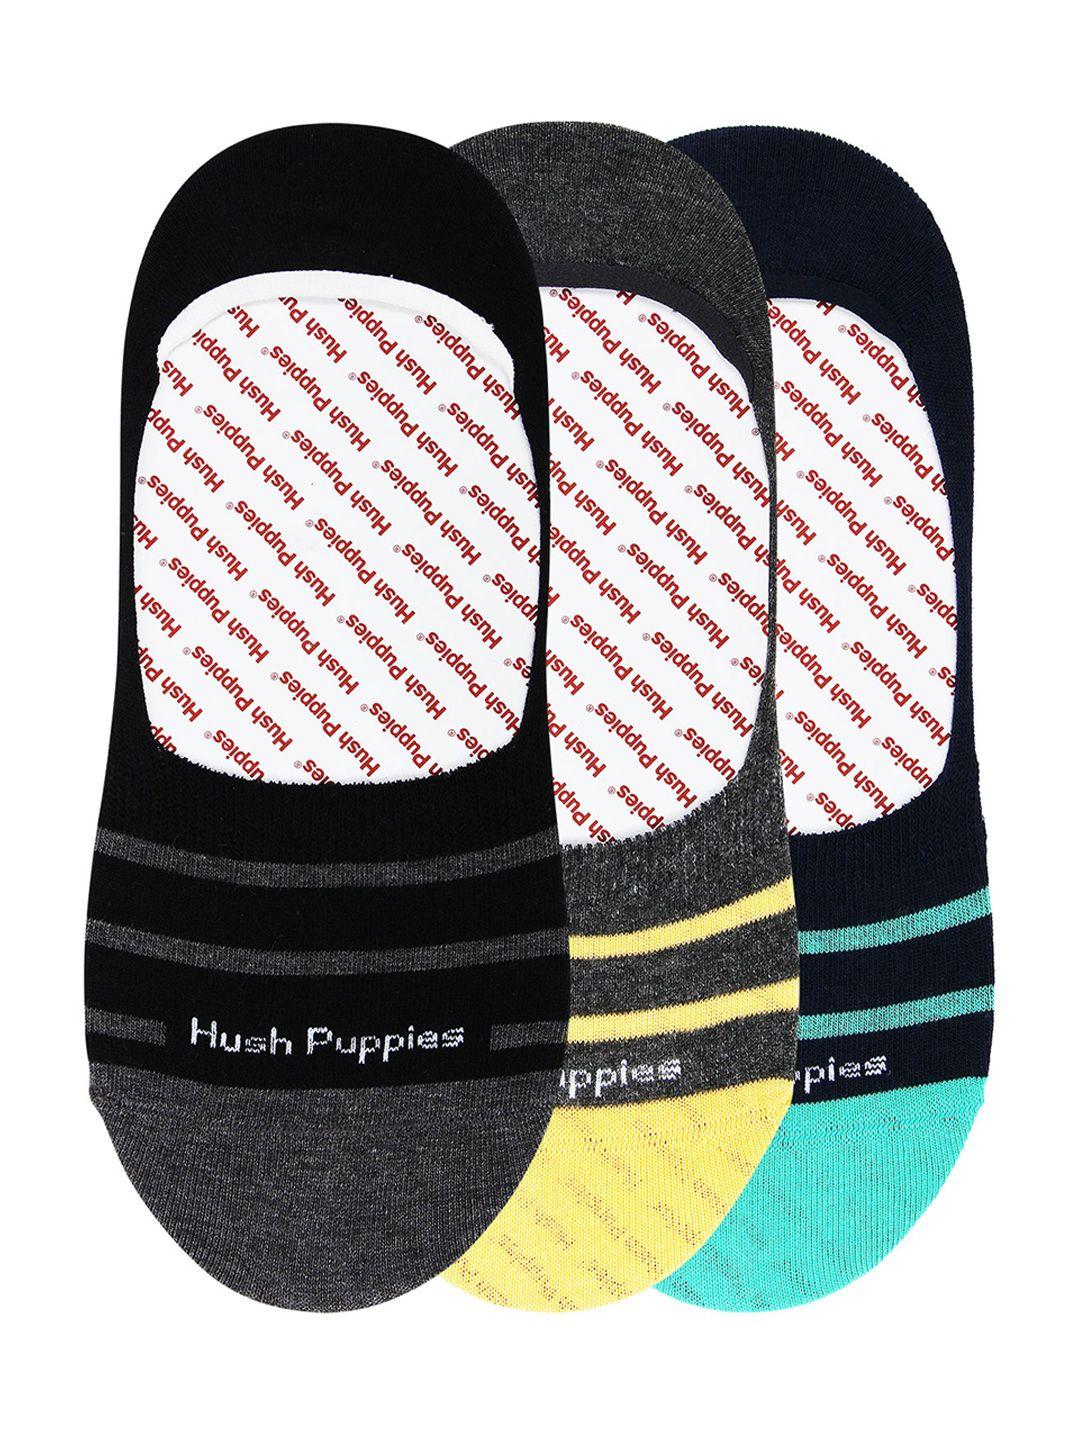 hush-puppies-men-pack-of-3-assorted-patterned-shoe-liners